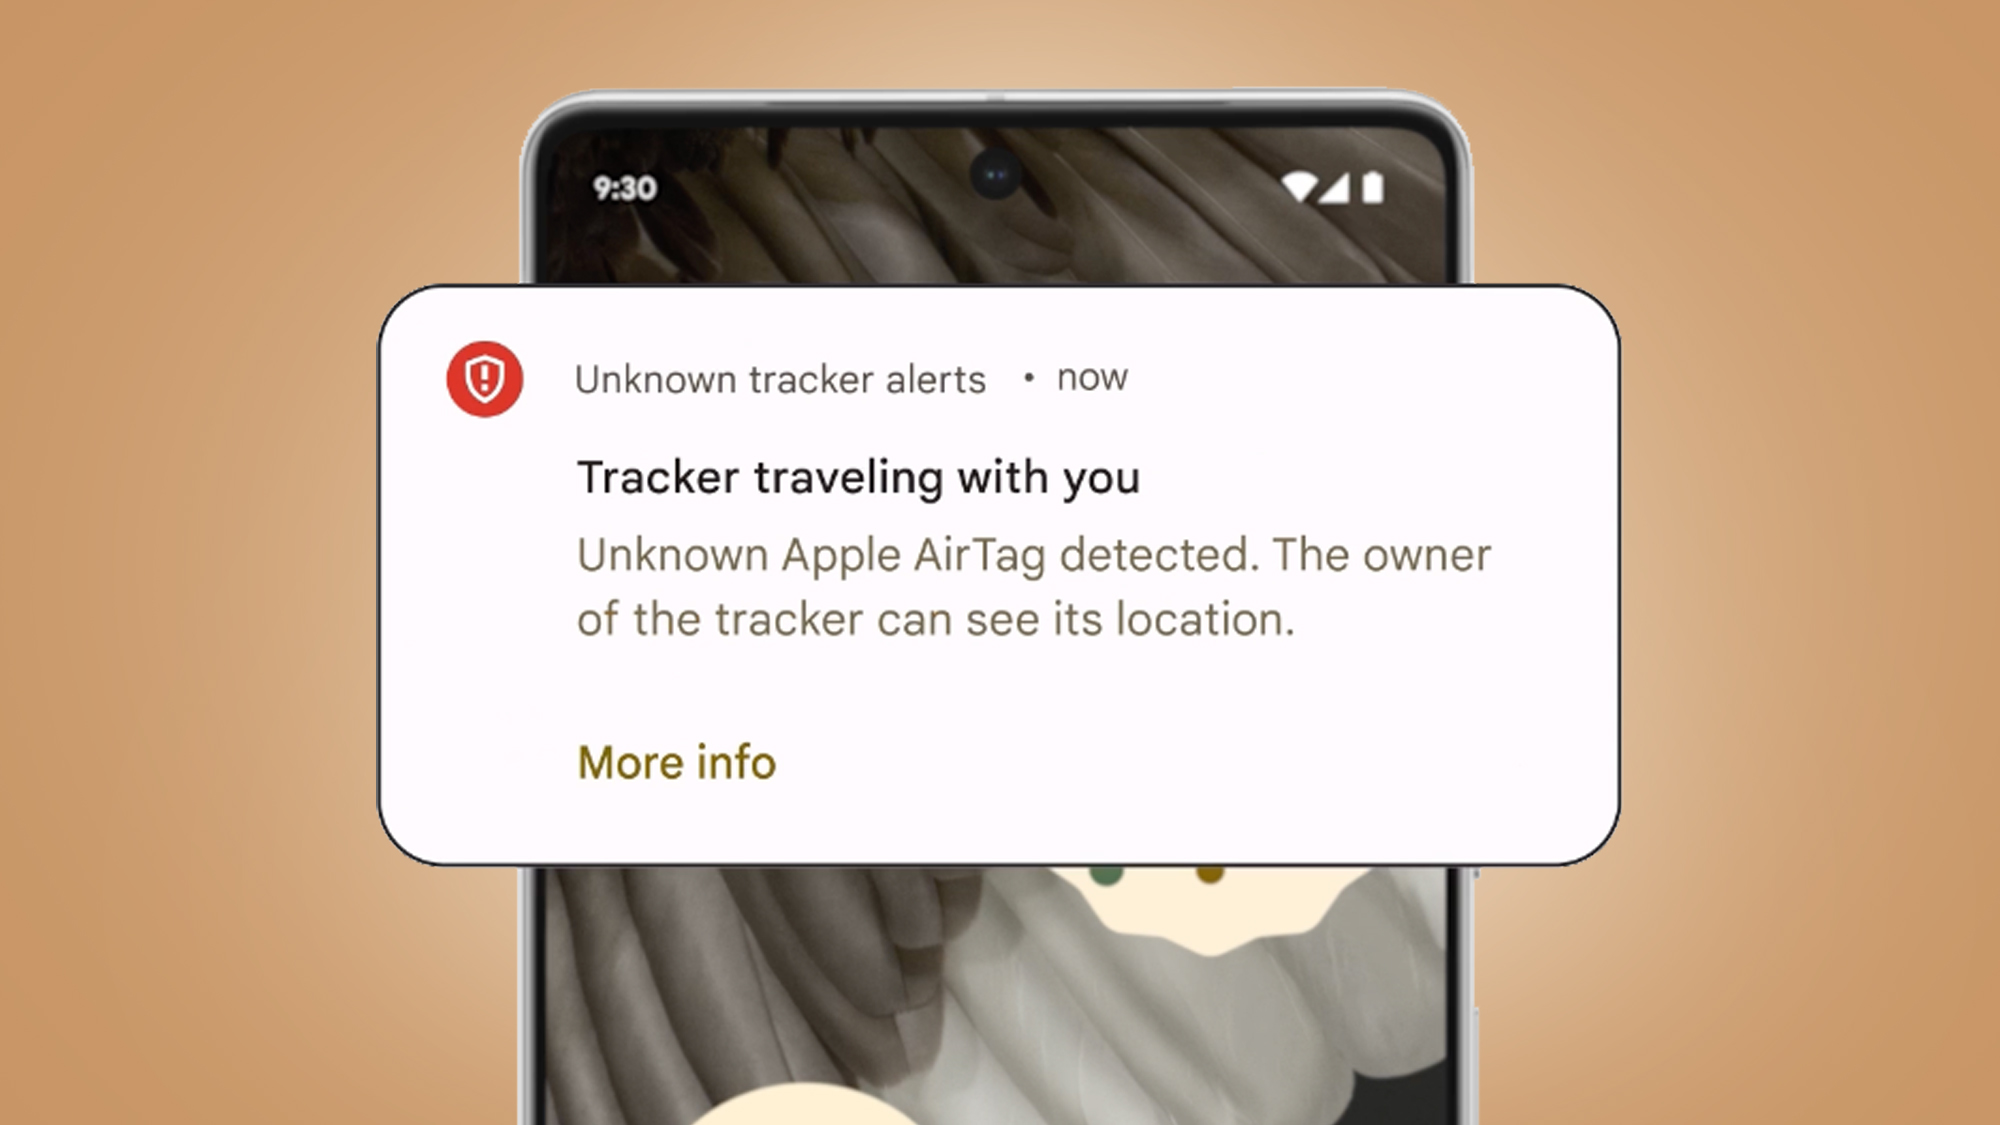 An Android phone on a beige background showing an alert about Apple AirTag tracking